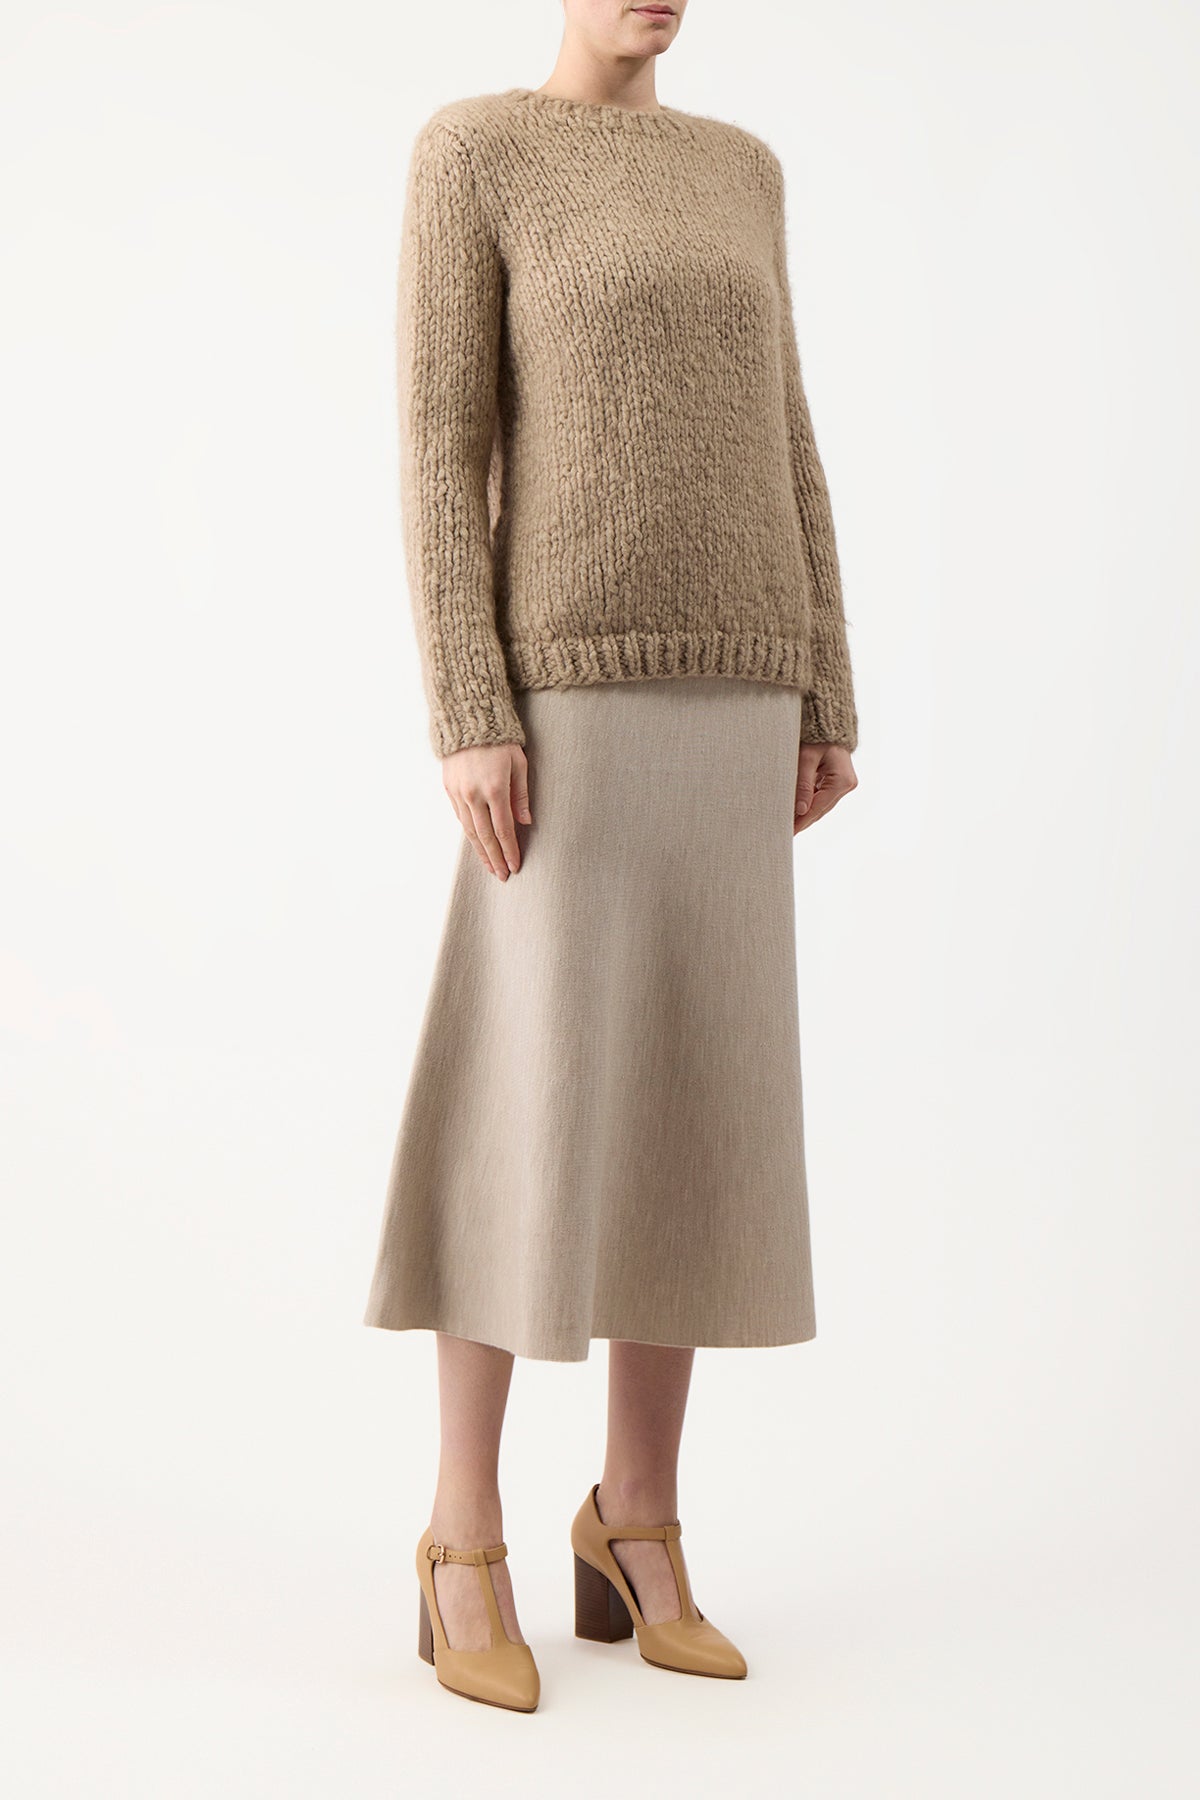 Lawrence Knit Sweater in Oatmeal Welfat Cashmere